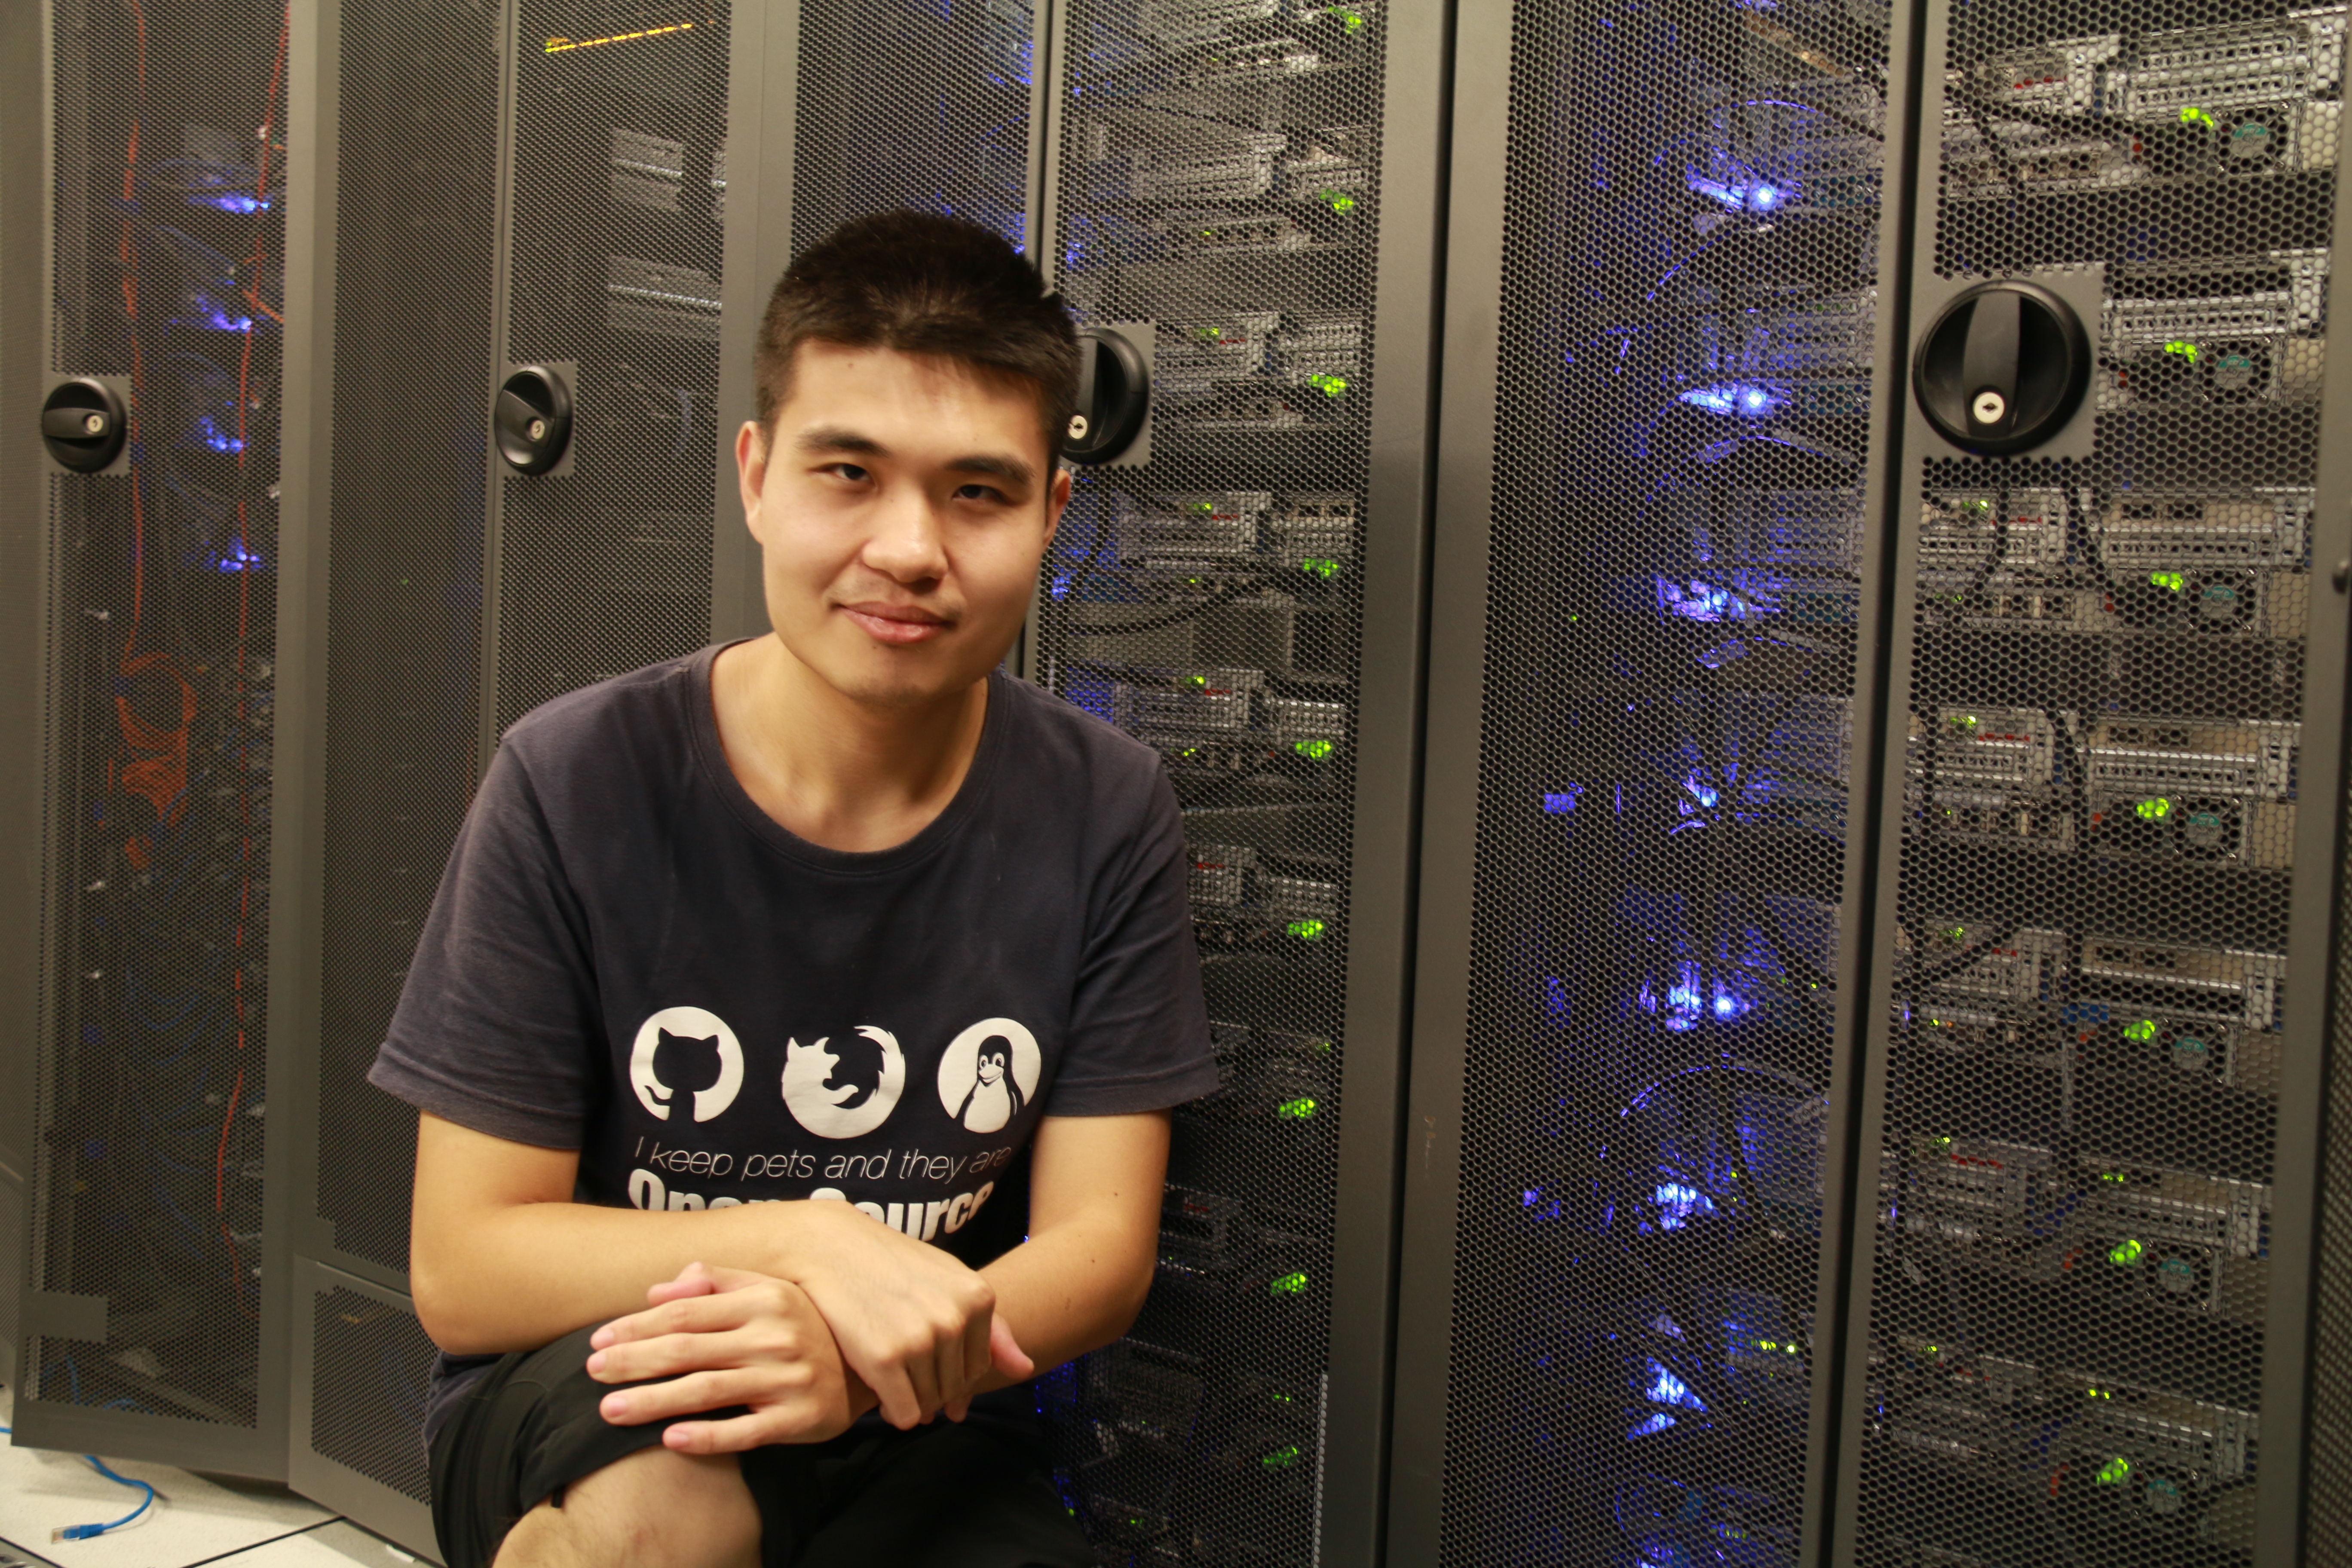 Above: Me with MSRA's network group servers, taken by MSRA for promotional materials, I often use this photo